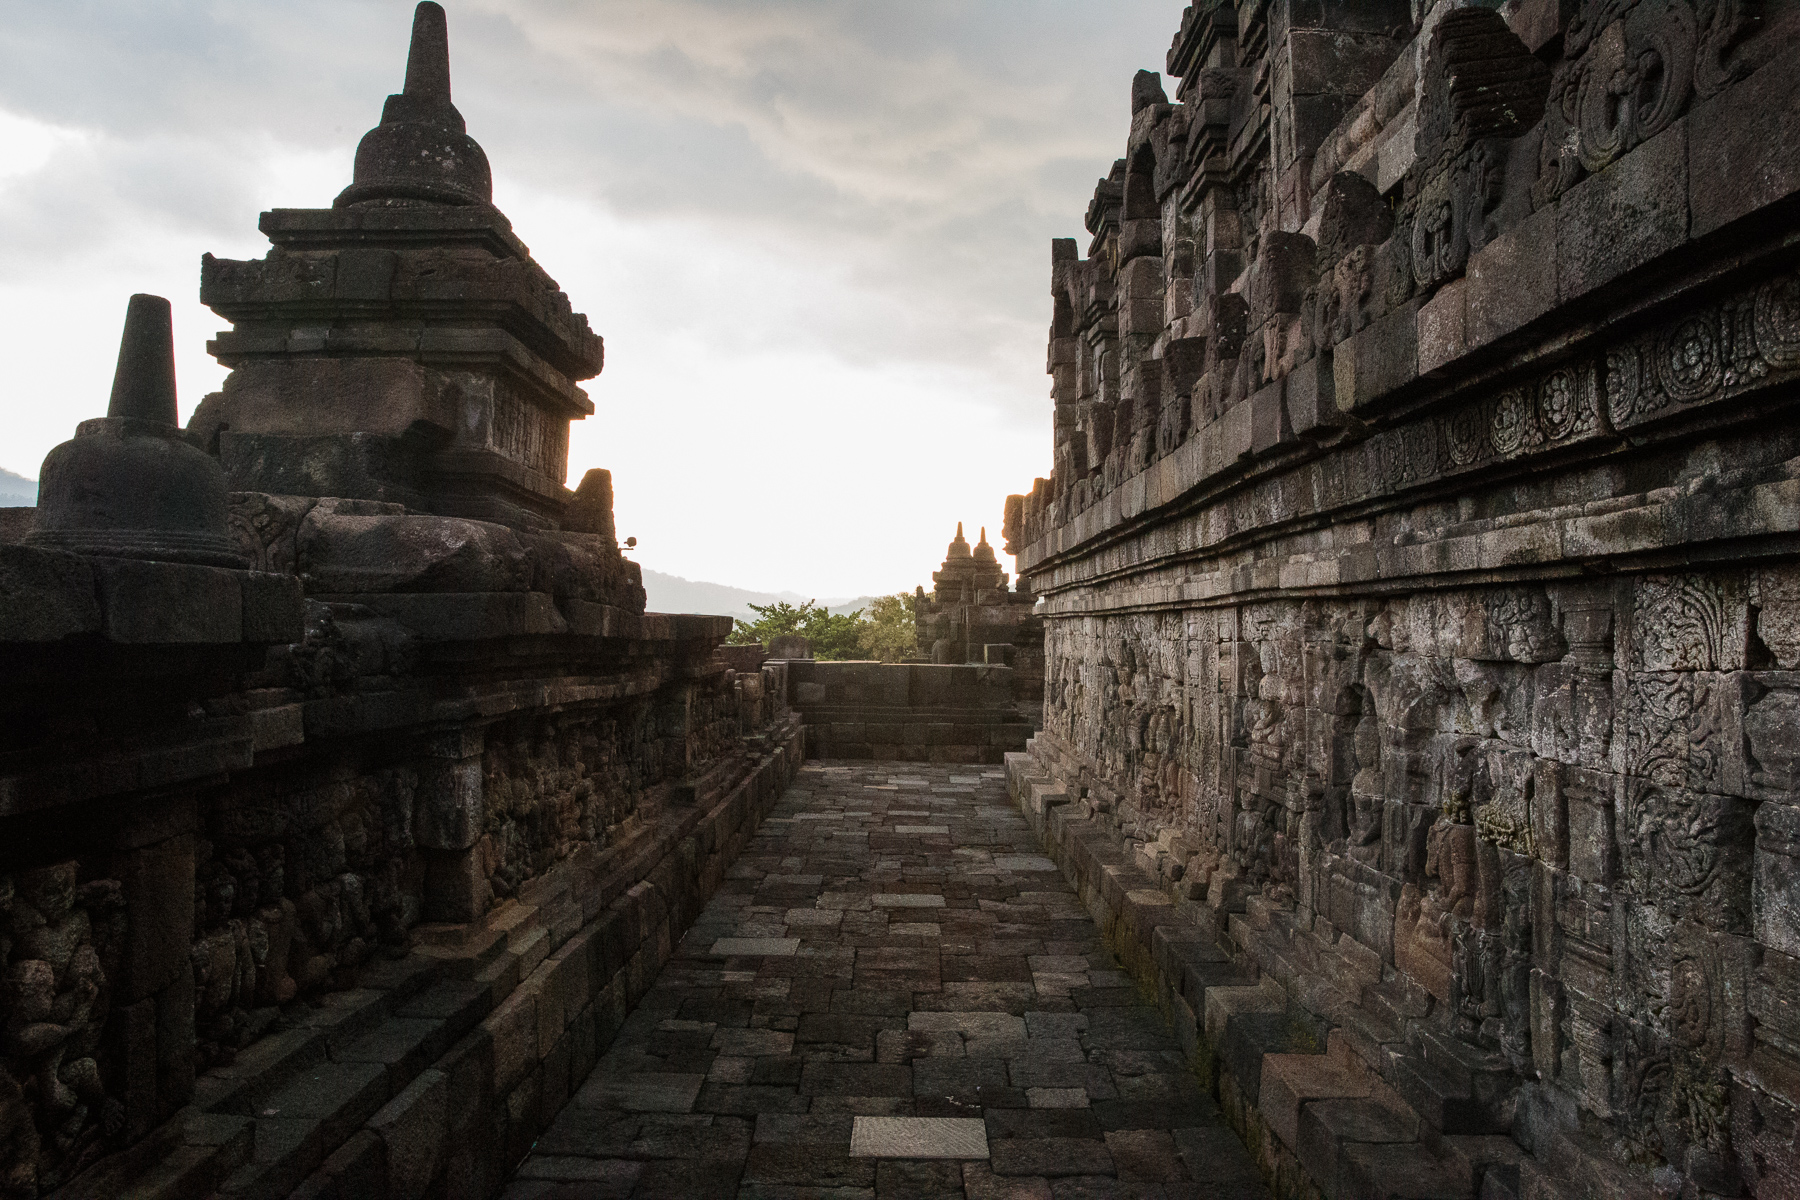 Borobudur Temple - The carvings on the first 4 levels all depict life during the era of construction.